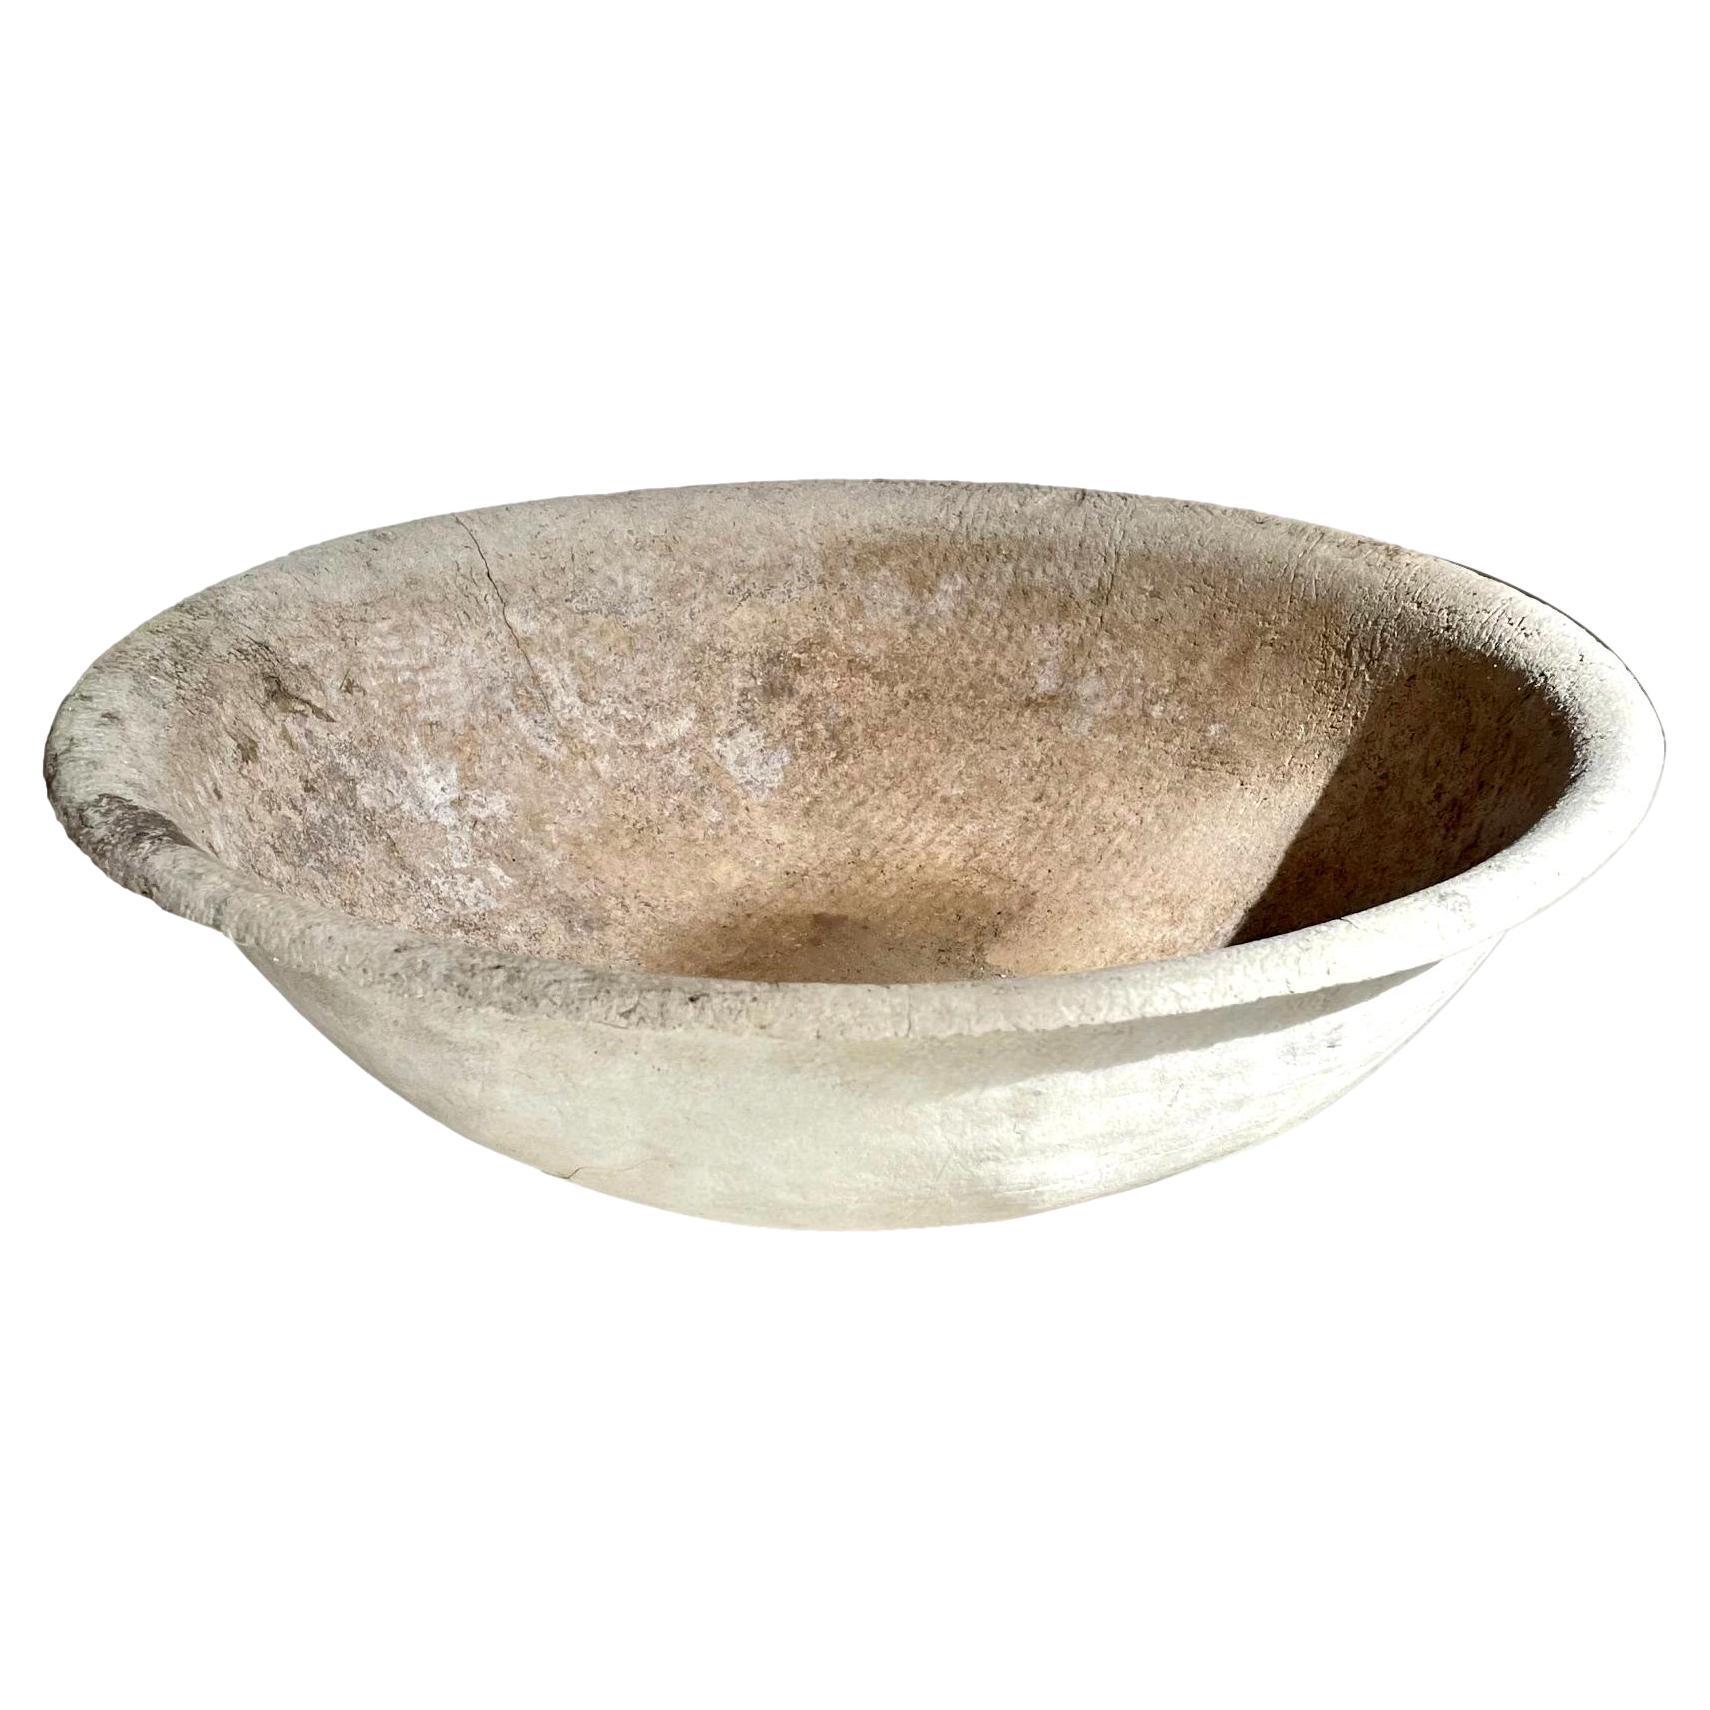 Willy Guhl Small Bowl Planter, 1950s, Switzerland For Sale